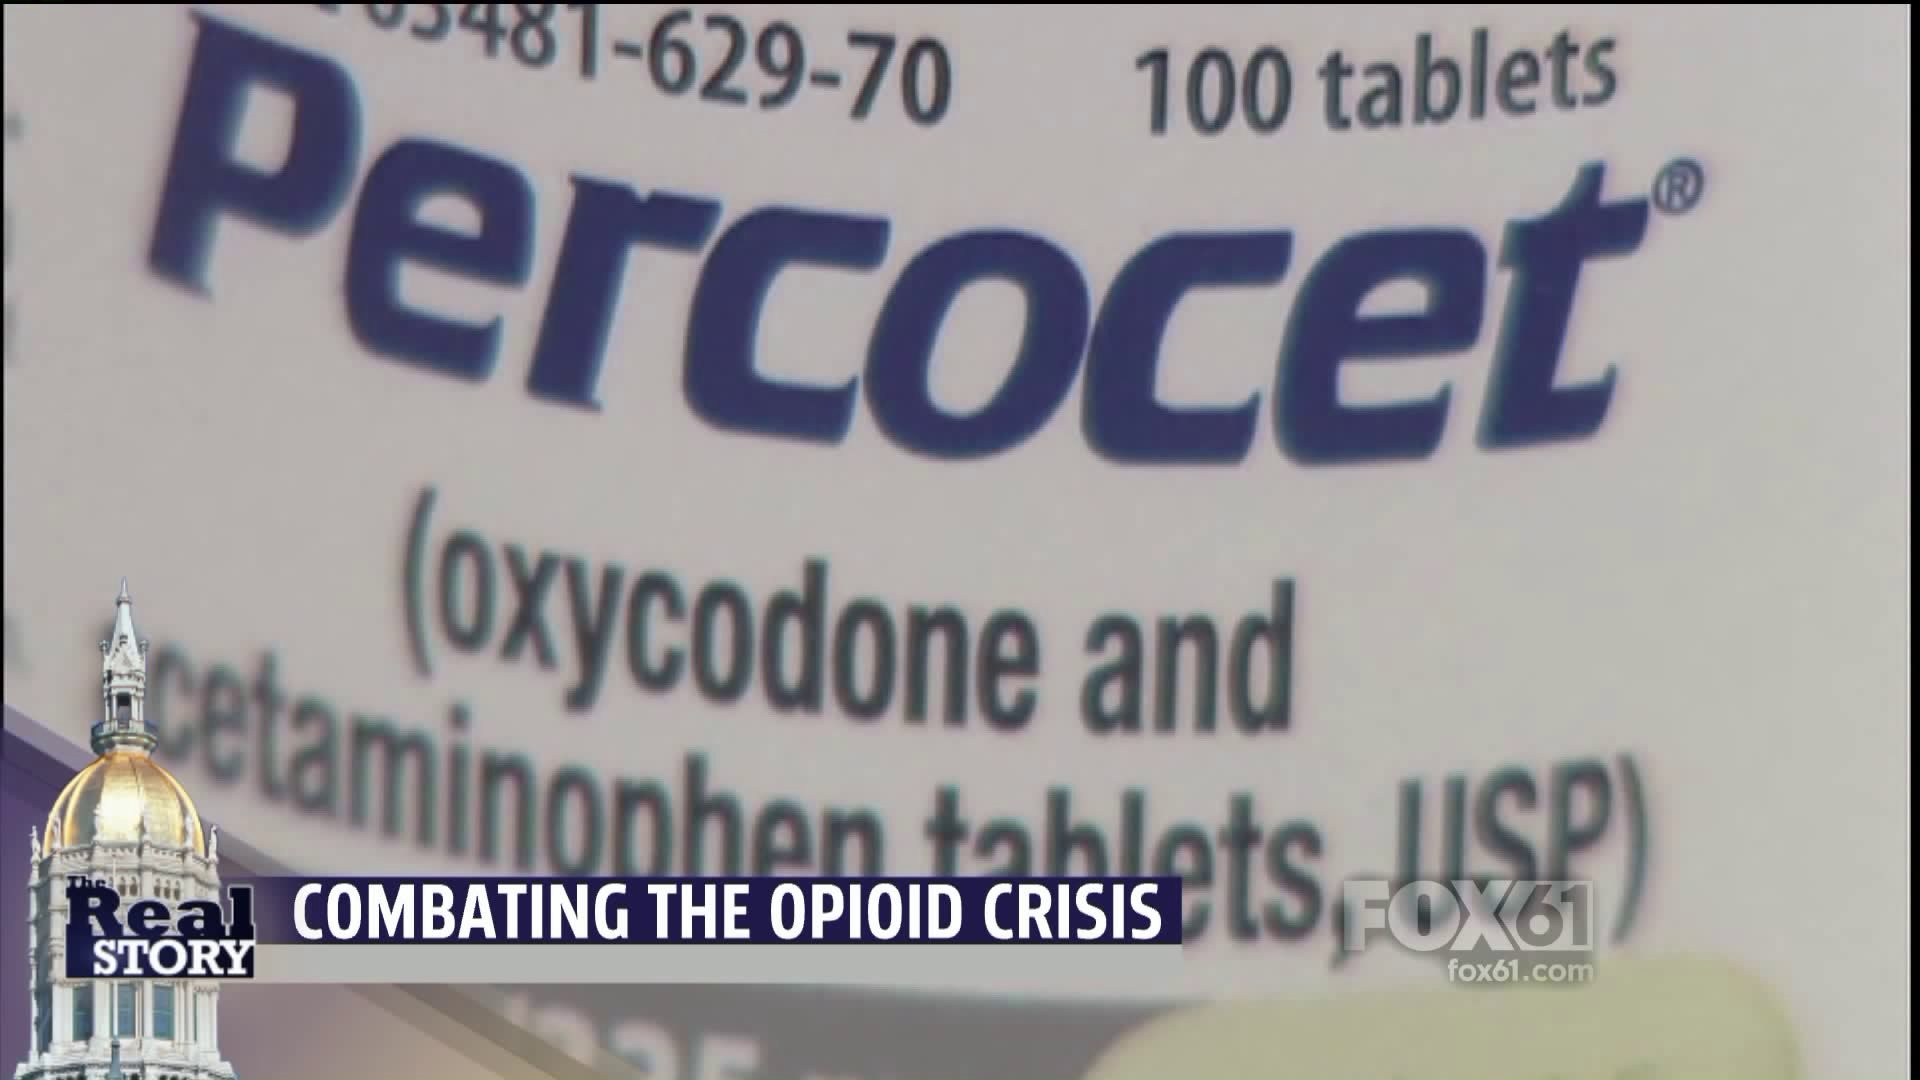 The Real Story: The Opioid crisis